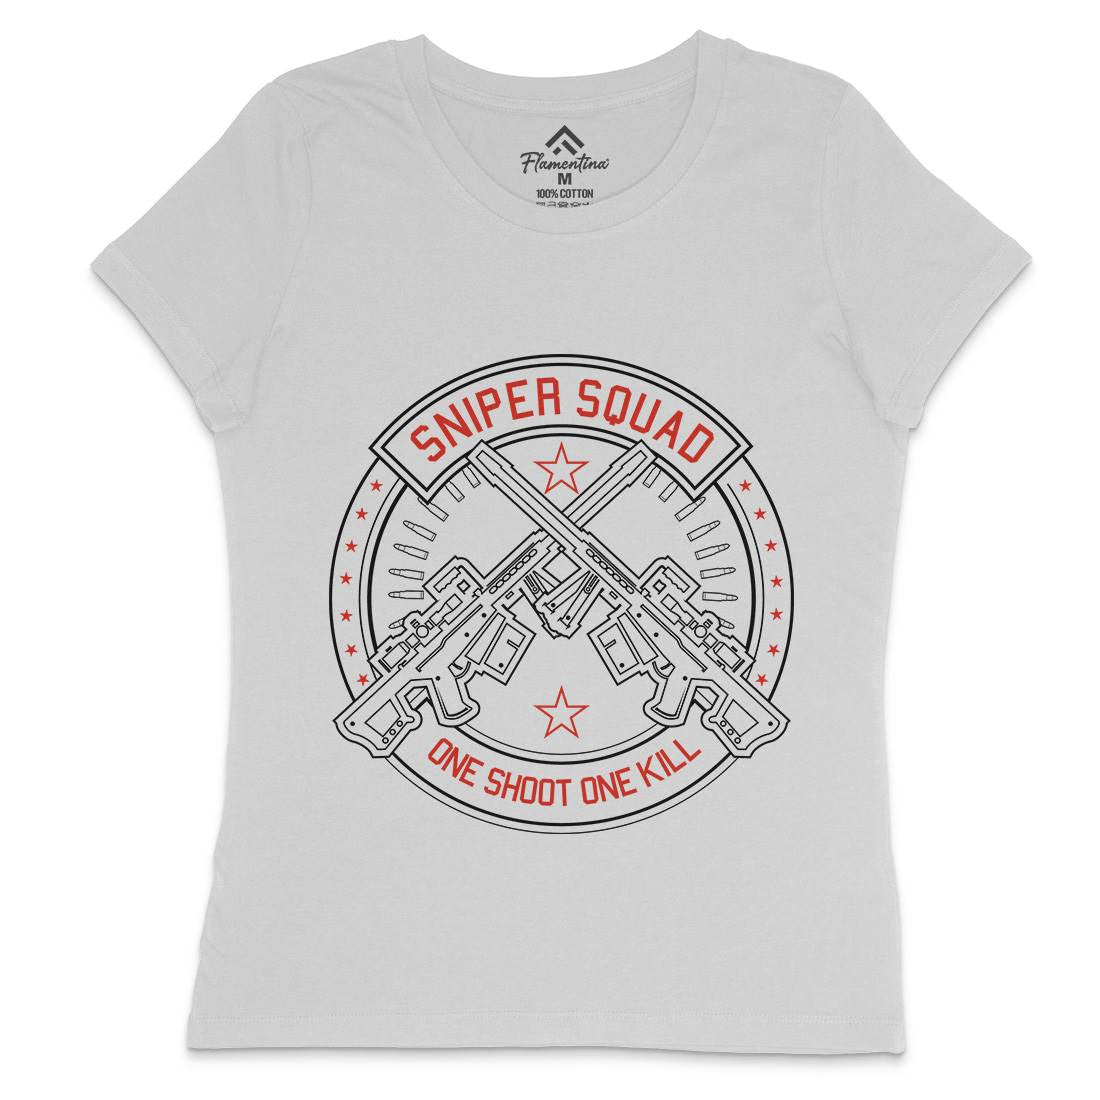 Sniper Squad Womens Crew Neck T-Shirt Army A279